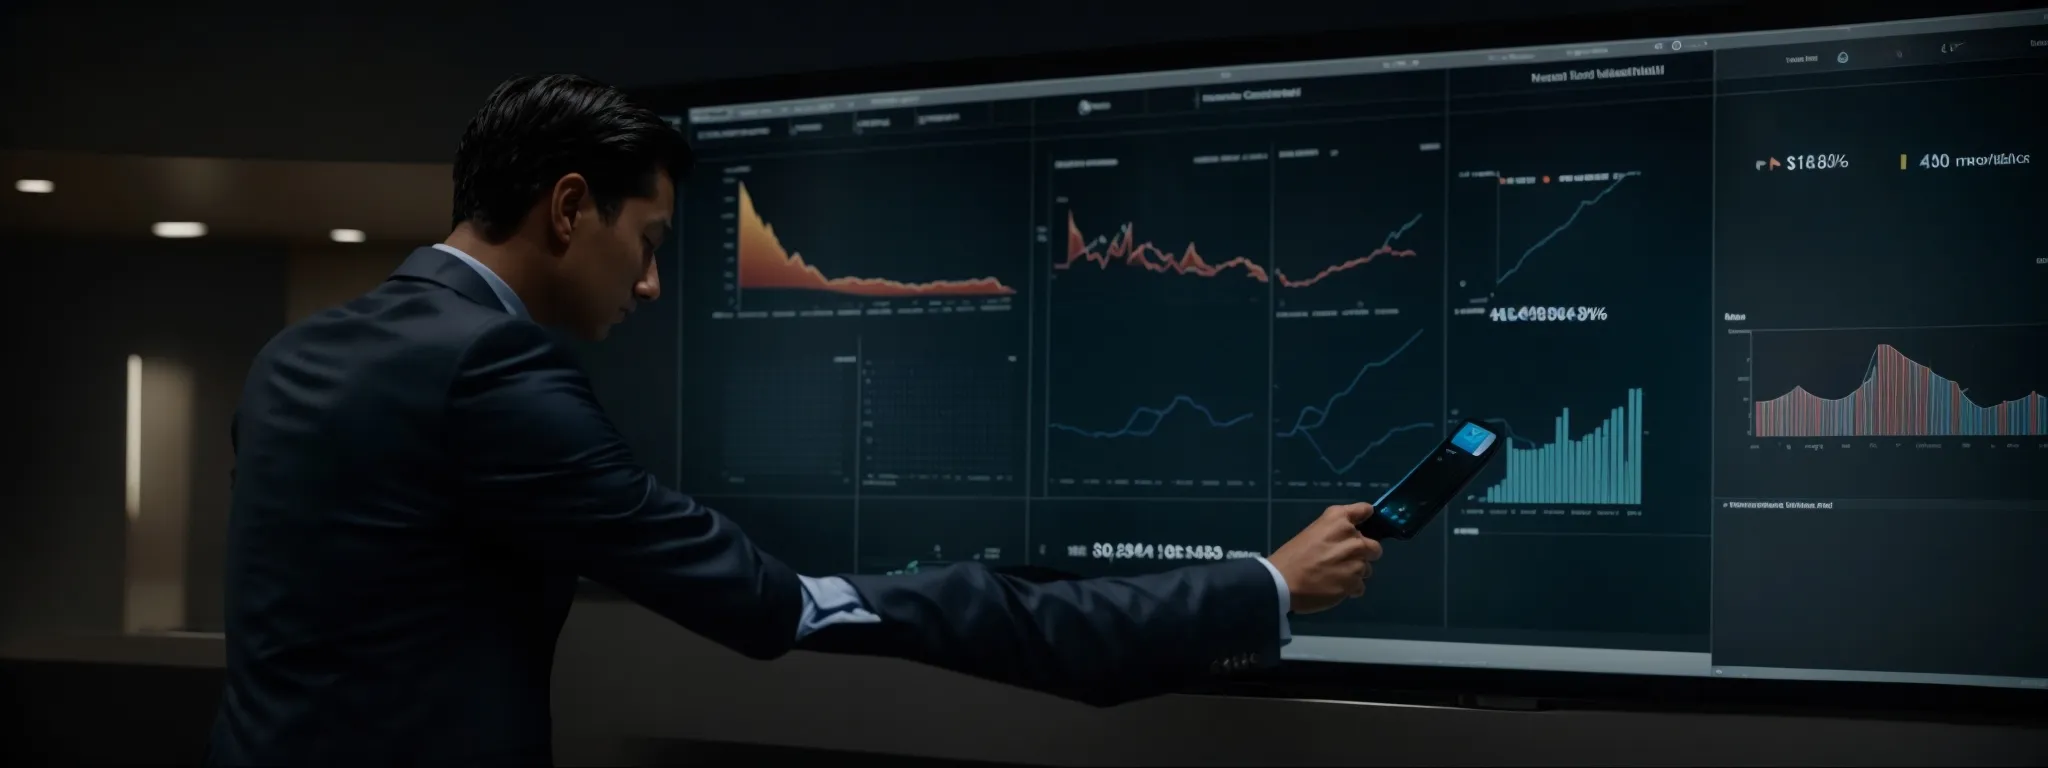 a business professional interacts with an interactive dashboard on a sleek touchscreen display, illustrating dynamic data analytics.